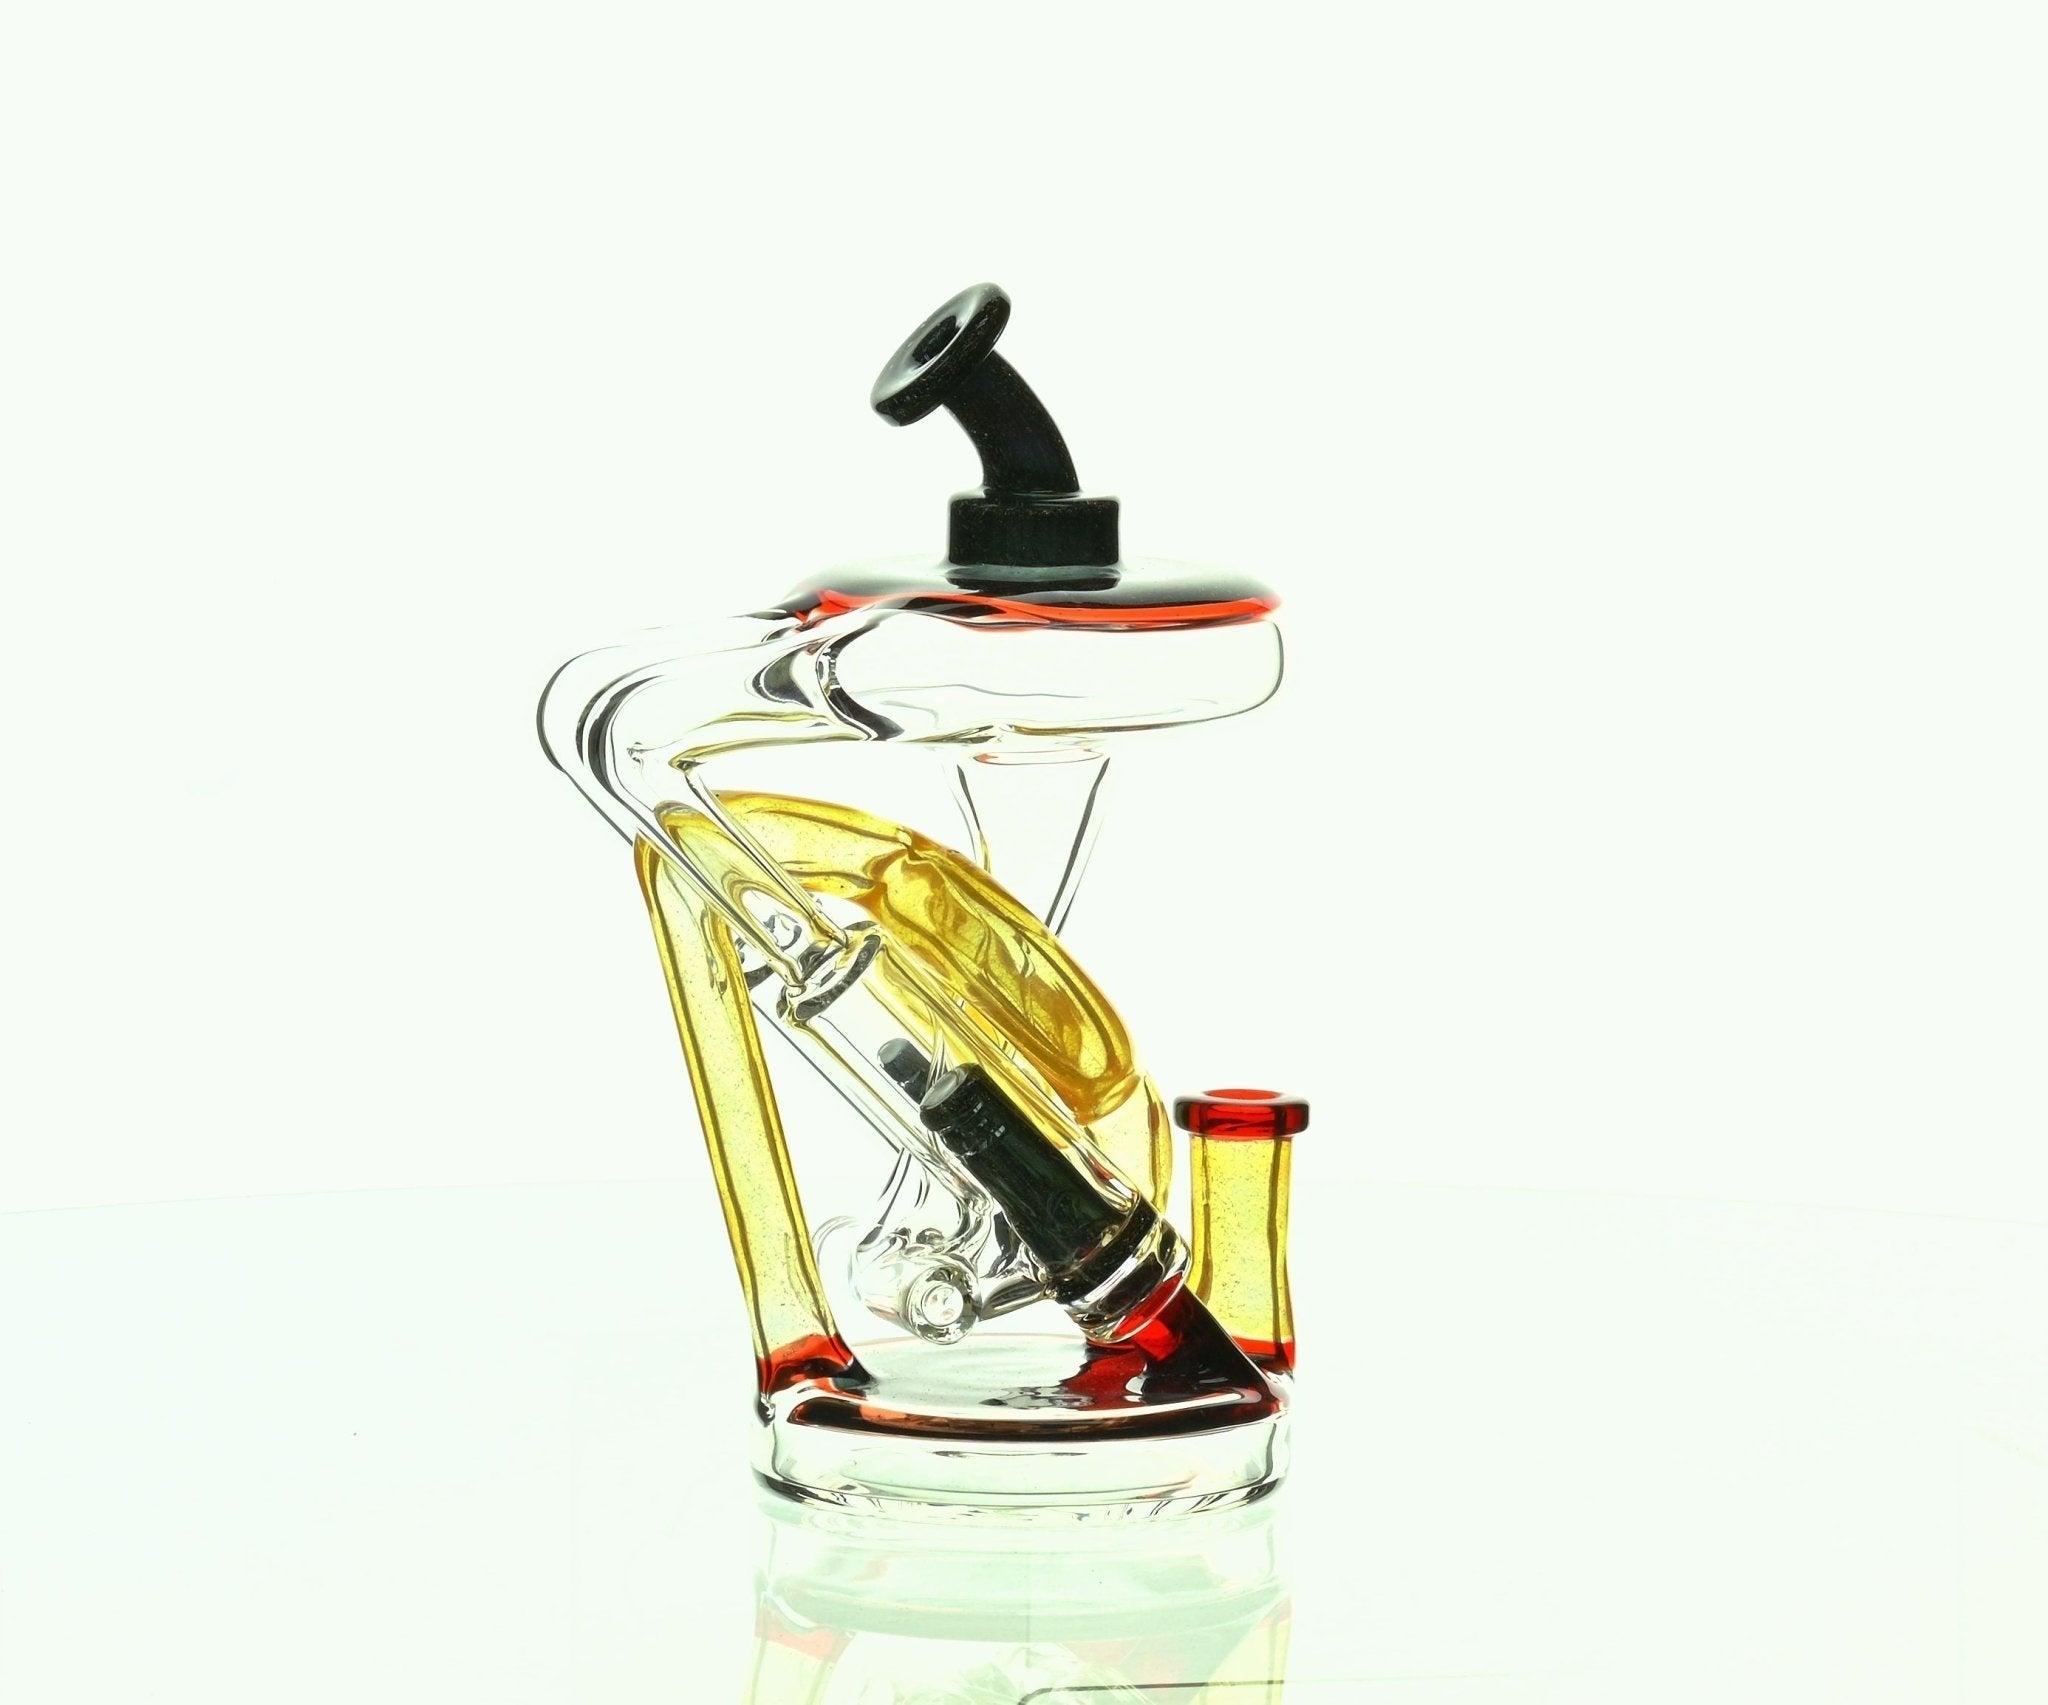 NIB GLASS YELLOW & RED DICRO PARTIAL COLOR PISTON RIG BLACK/CANARY & POMEGRANATE ACCENTS - SSSS